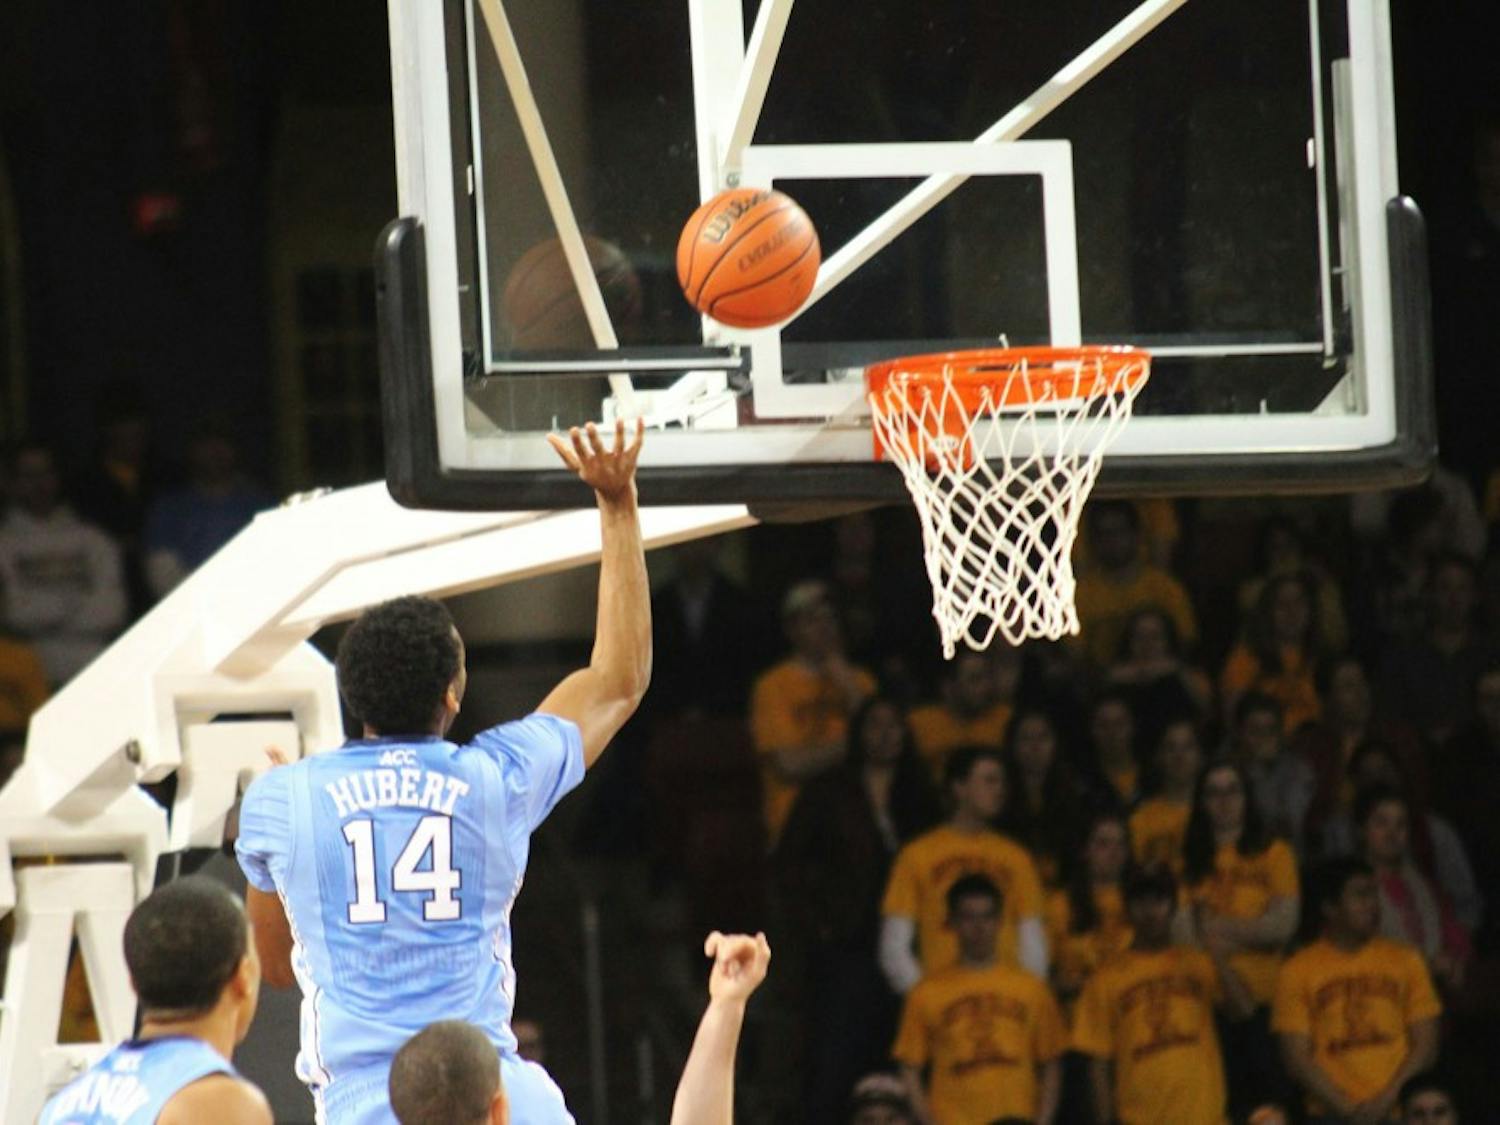 	Desmond Hubert goes for an offensive rebound after a missed shot in the first half.